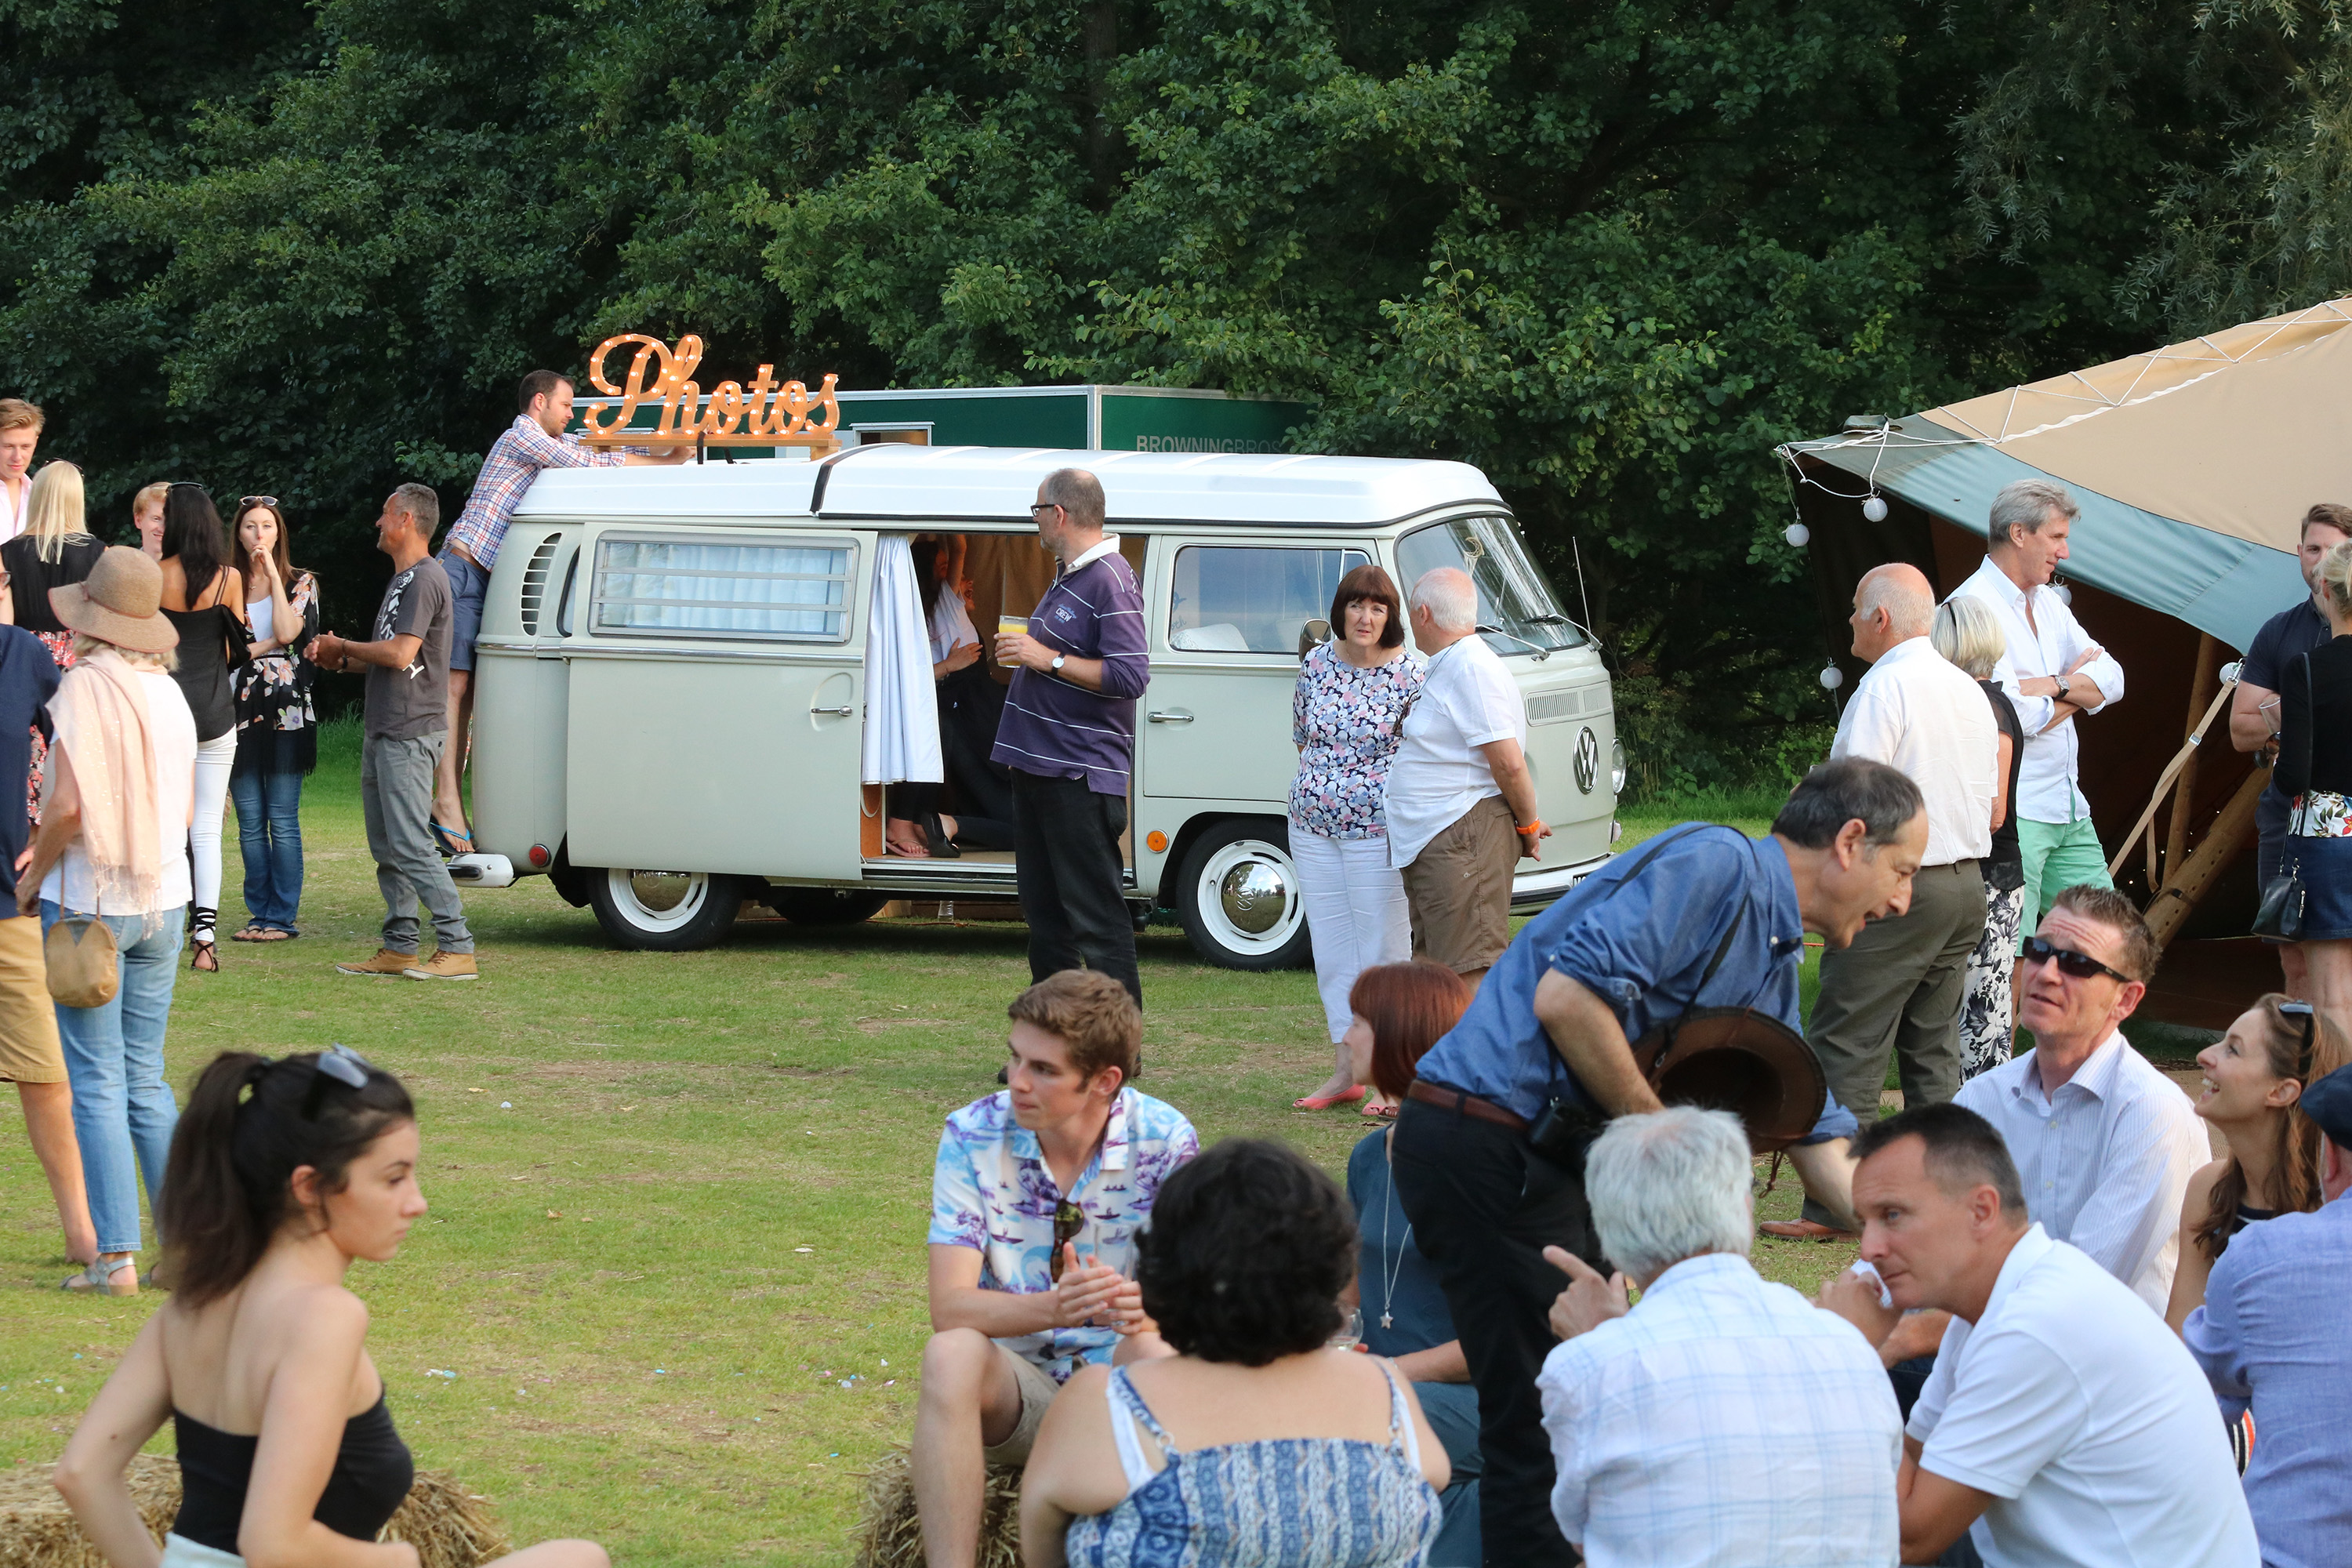 Mansfield Monk 25th anniversary celebrations - outdoor agthering of people by VW camper van photo booth